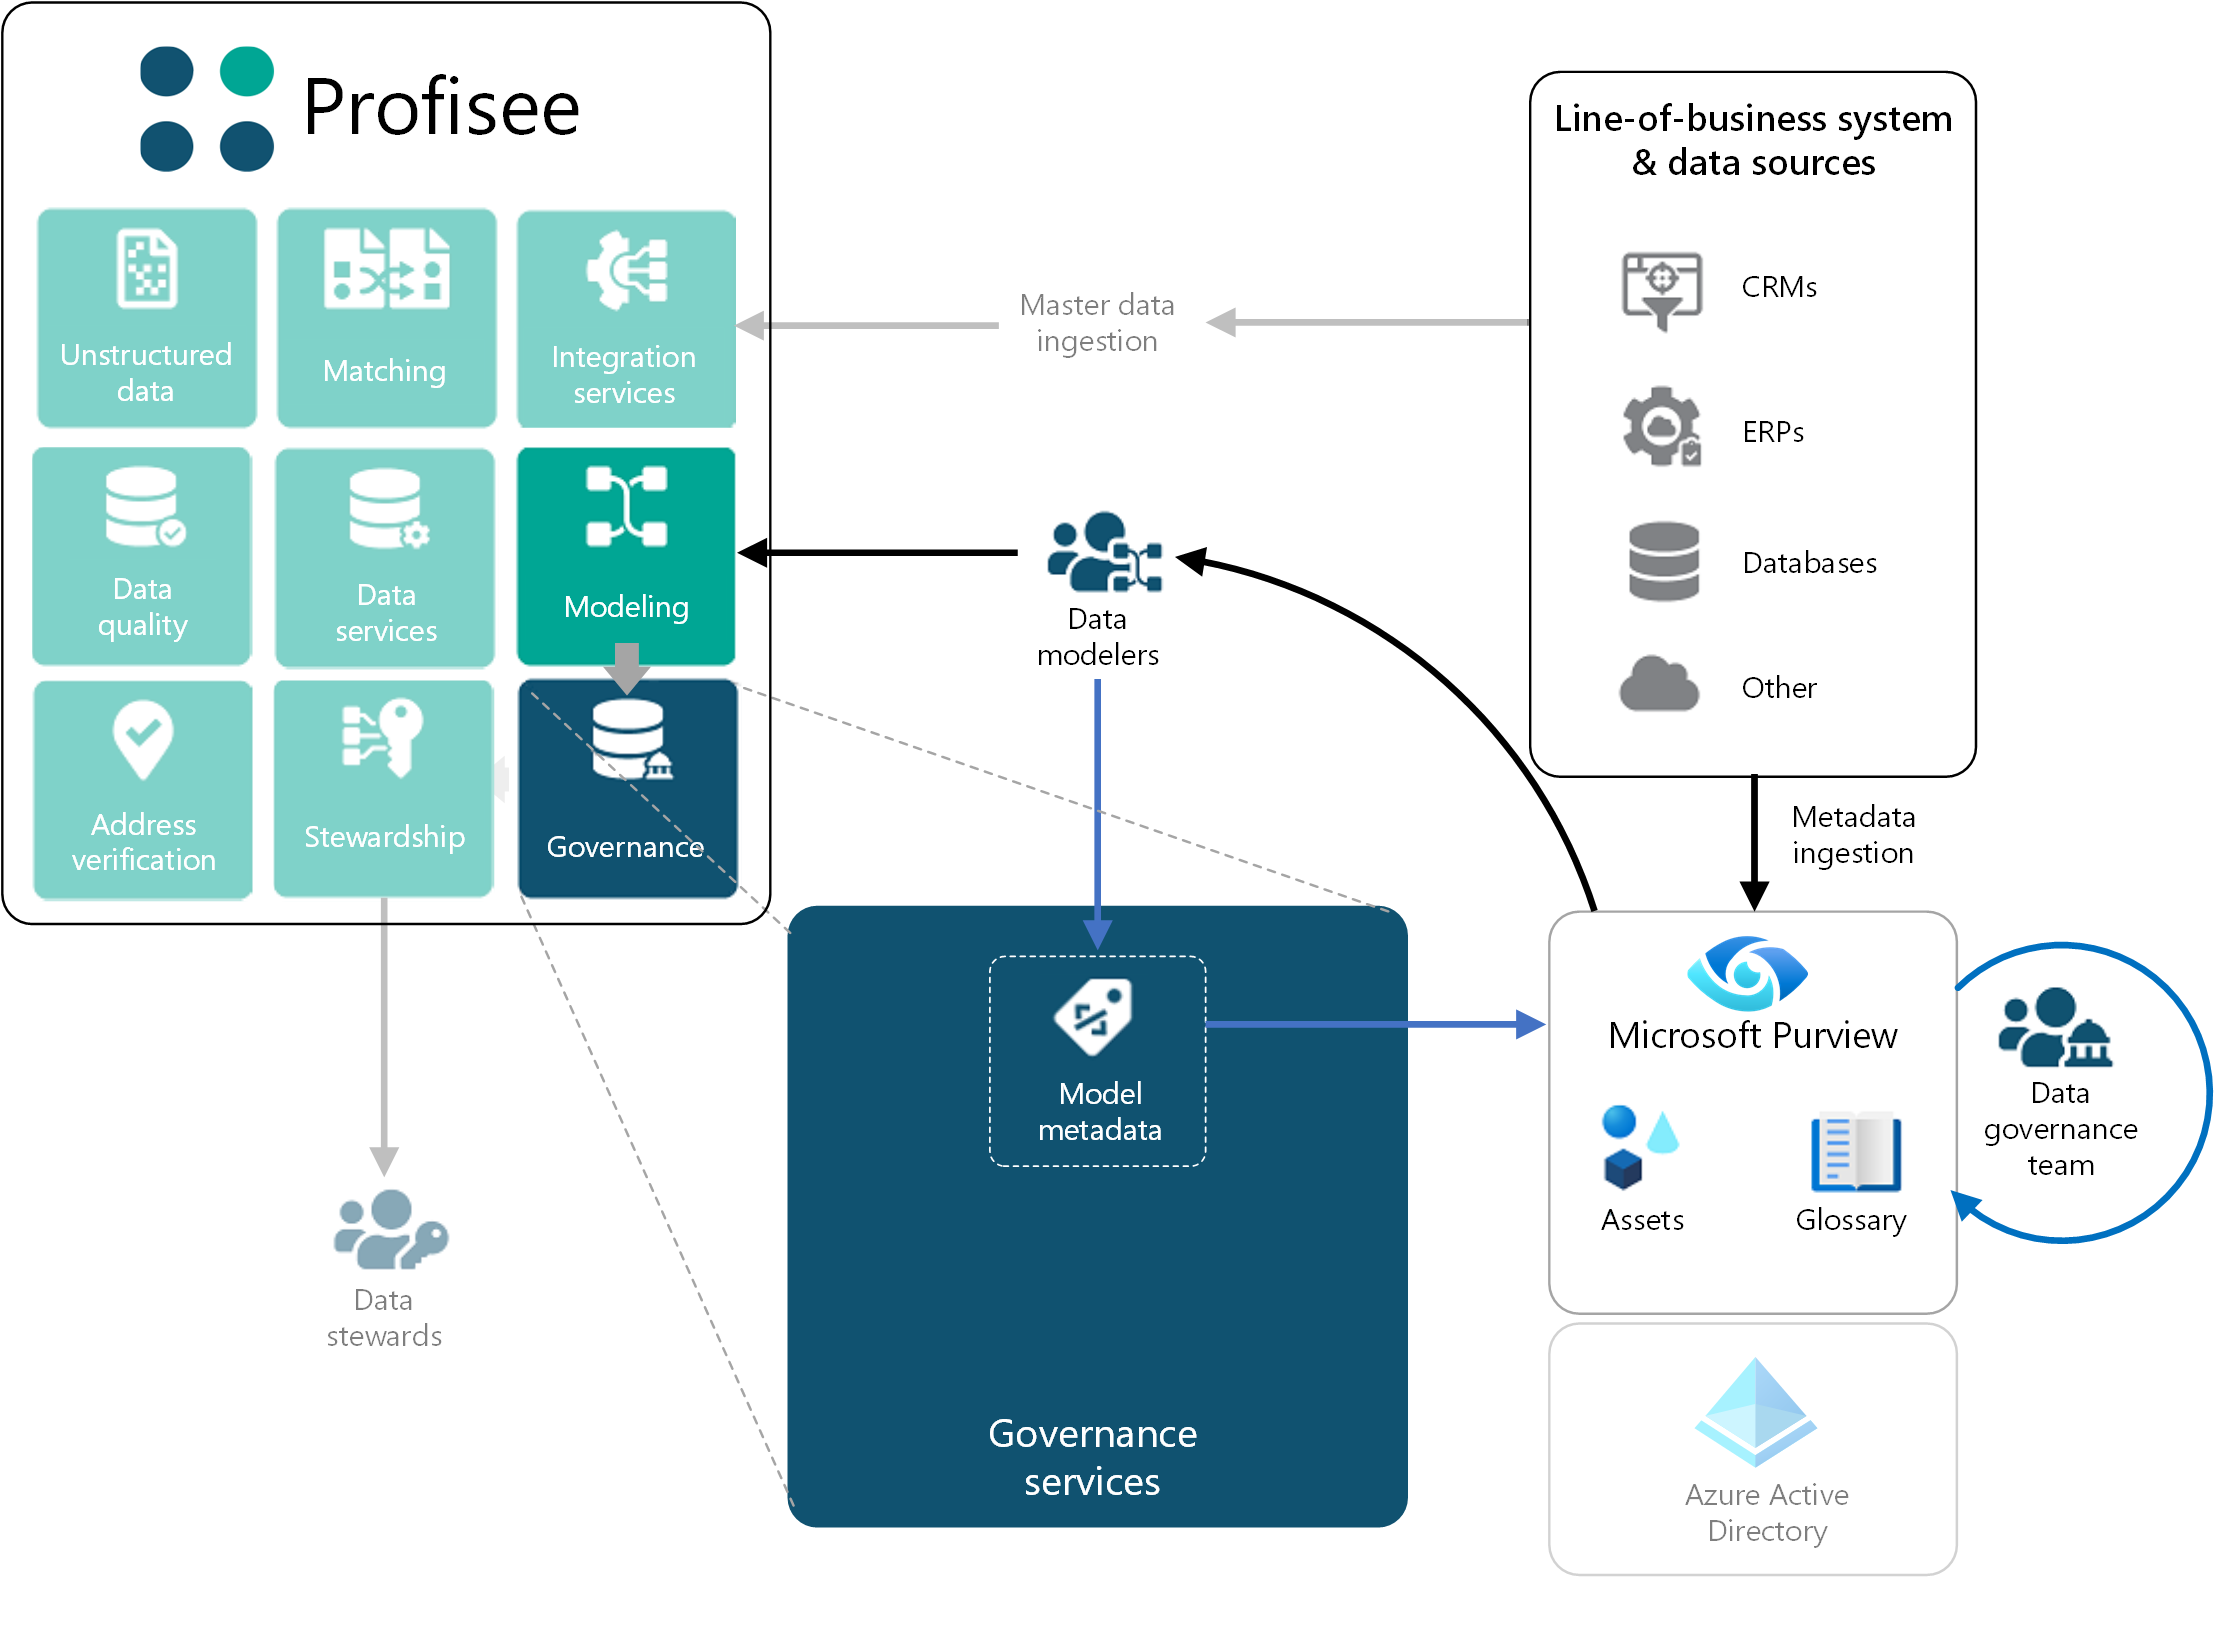 Diagram that shows a use case of Profisee MDM integrating with Microsoft Purview to ingest, model, and govern data.